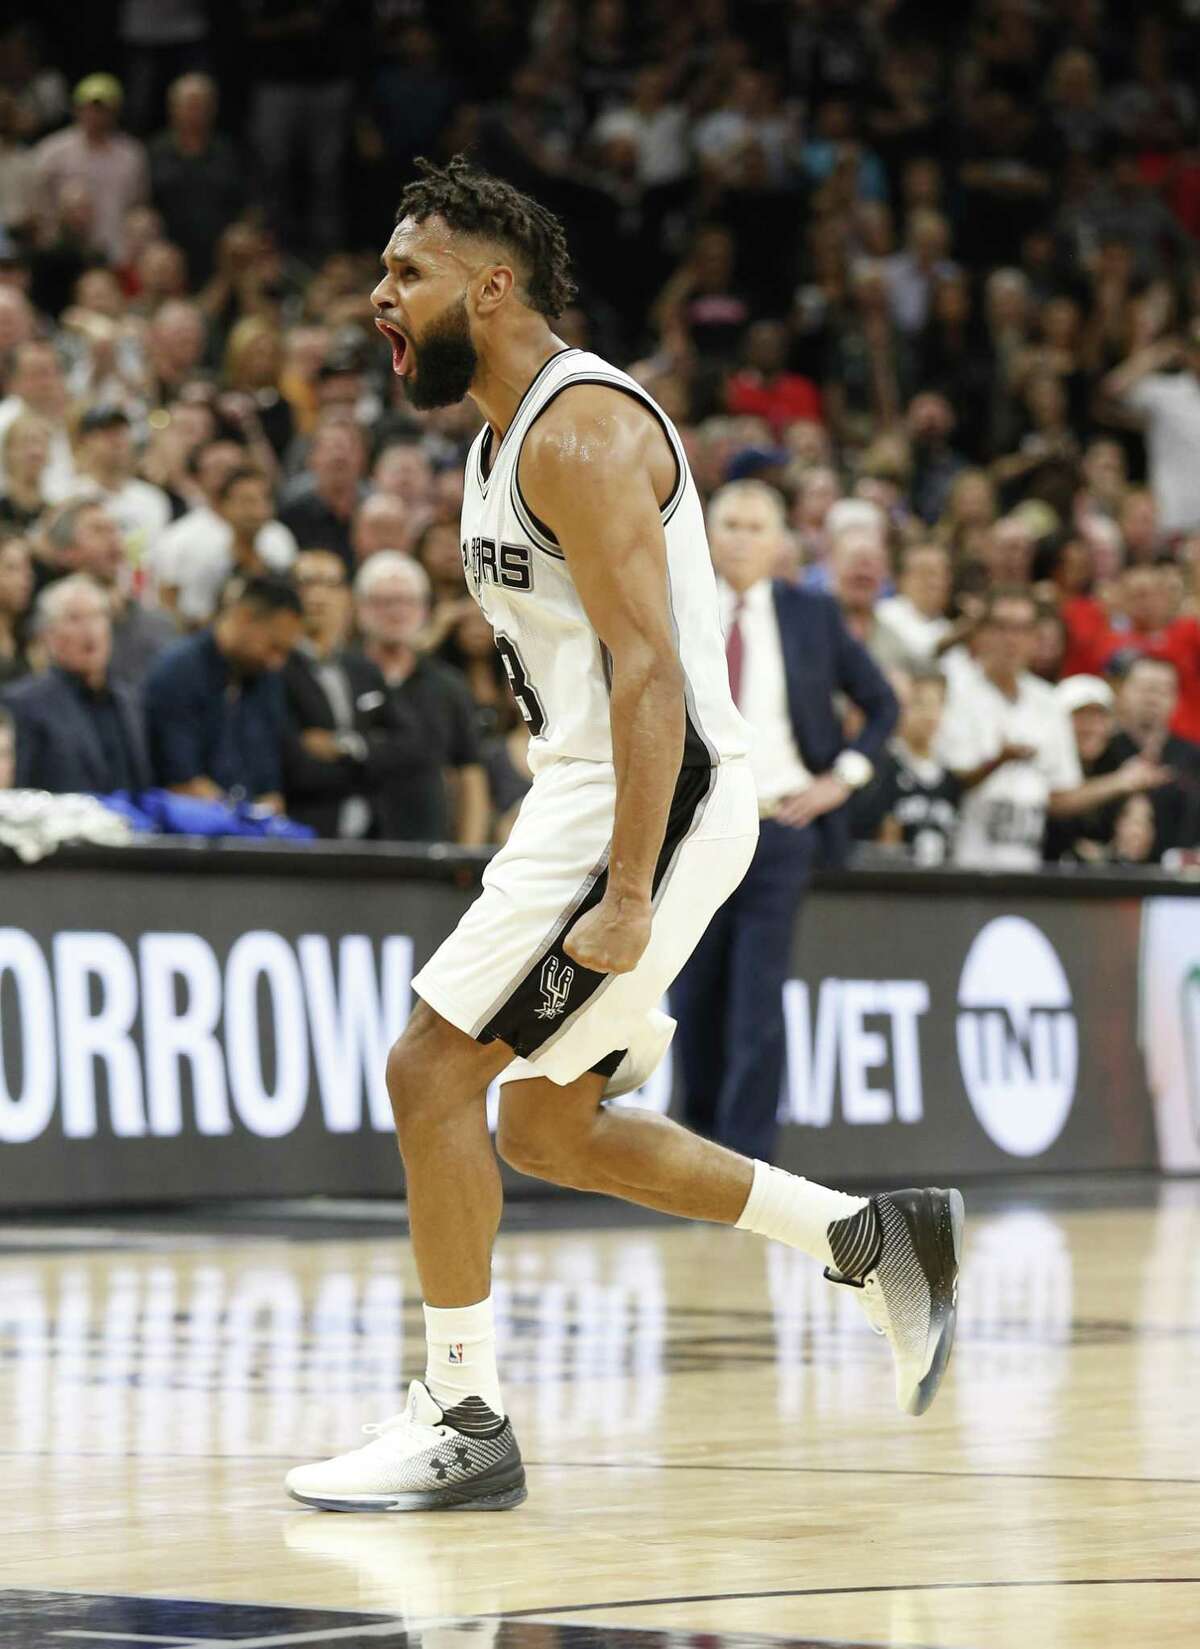 Spurs’ Patty Mills reacts after a big play during Game 5 against the Rockets at the AT&T Center on May 9, 2017.